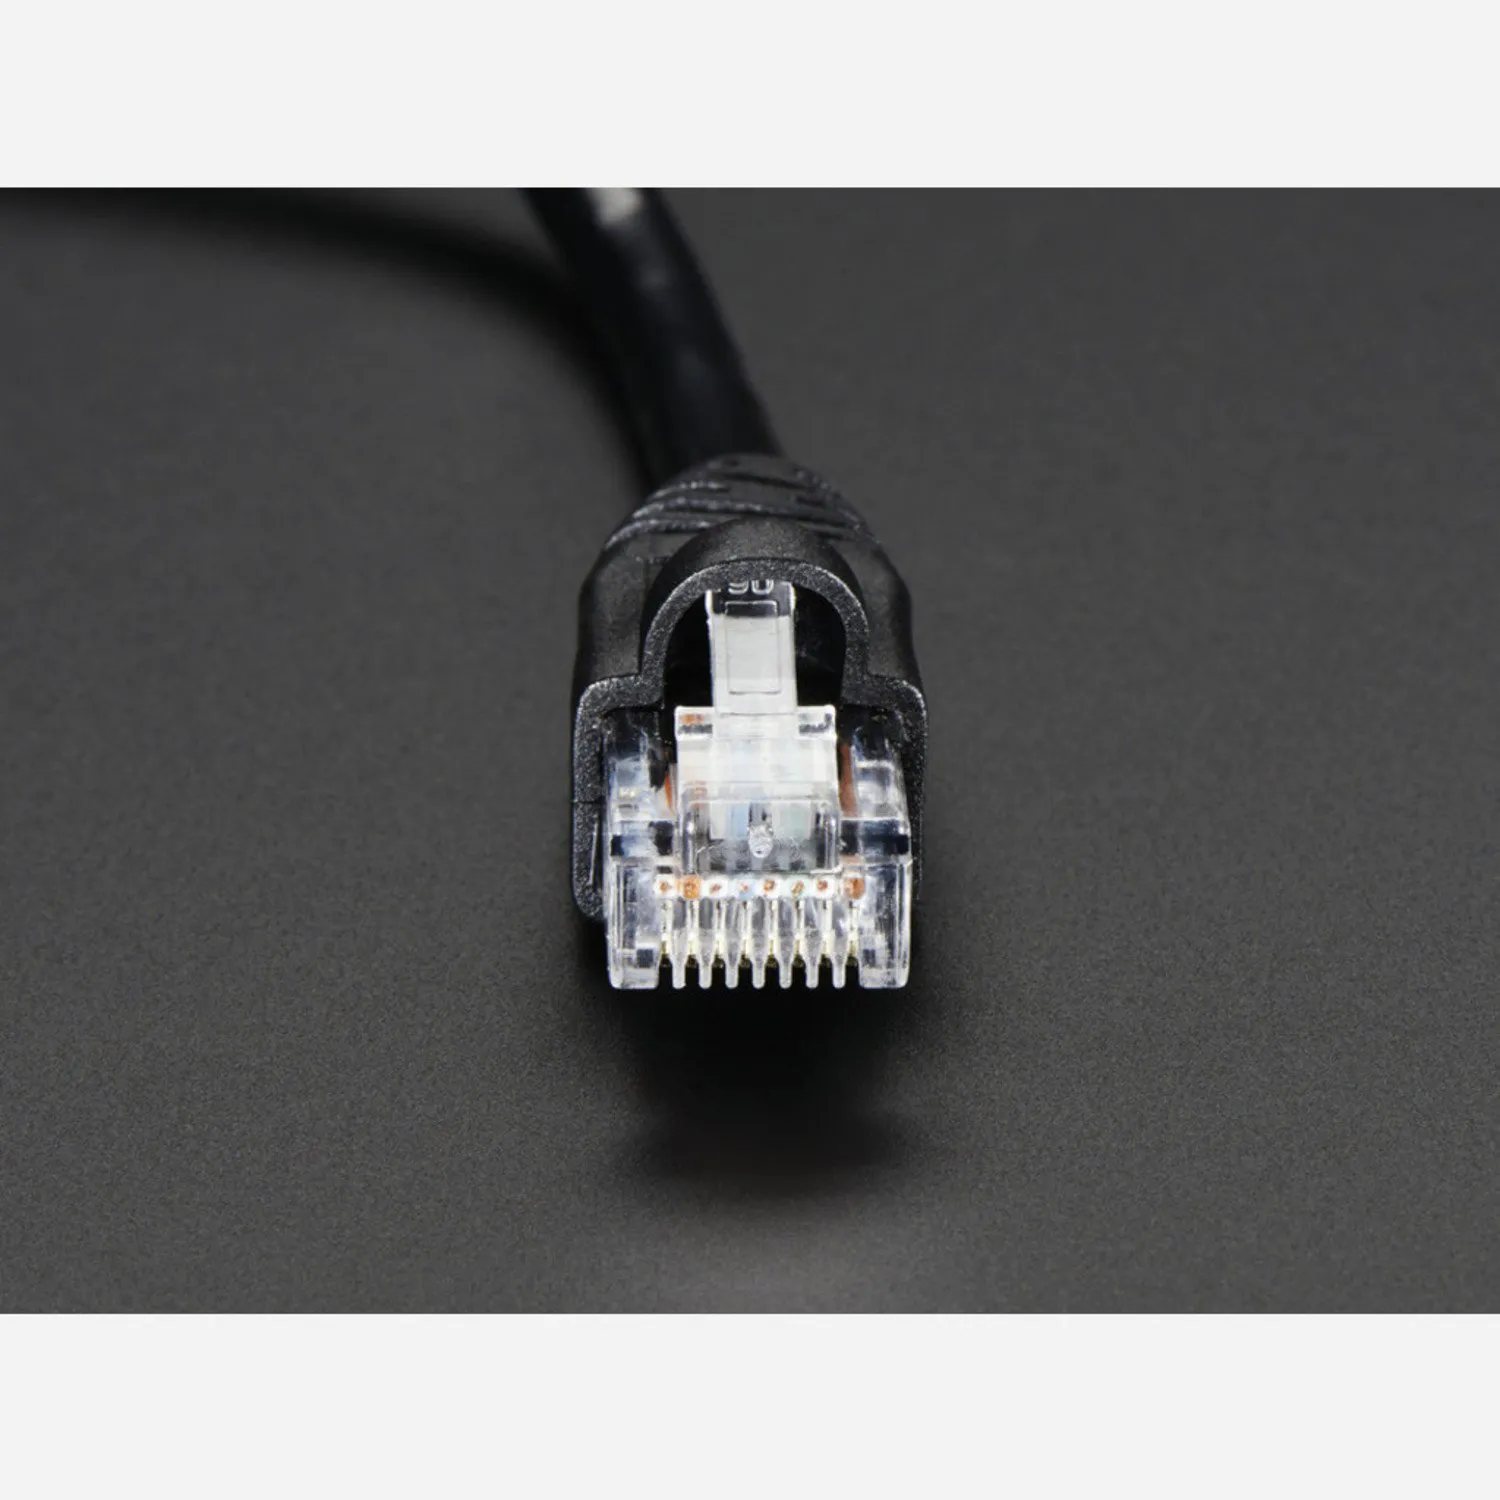 Photo of Panel Mount Ethernet Extension Cable